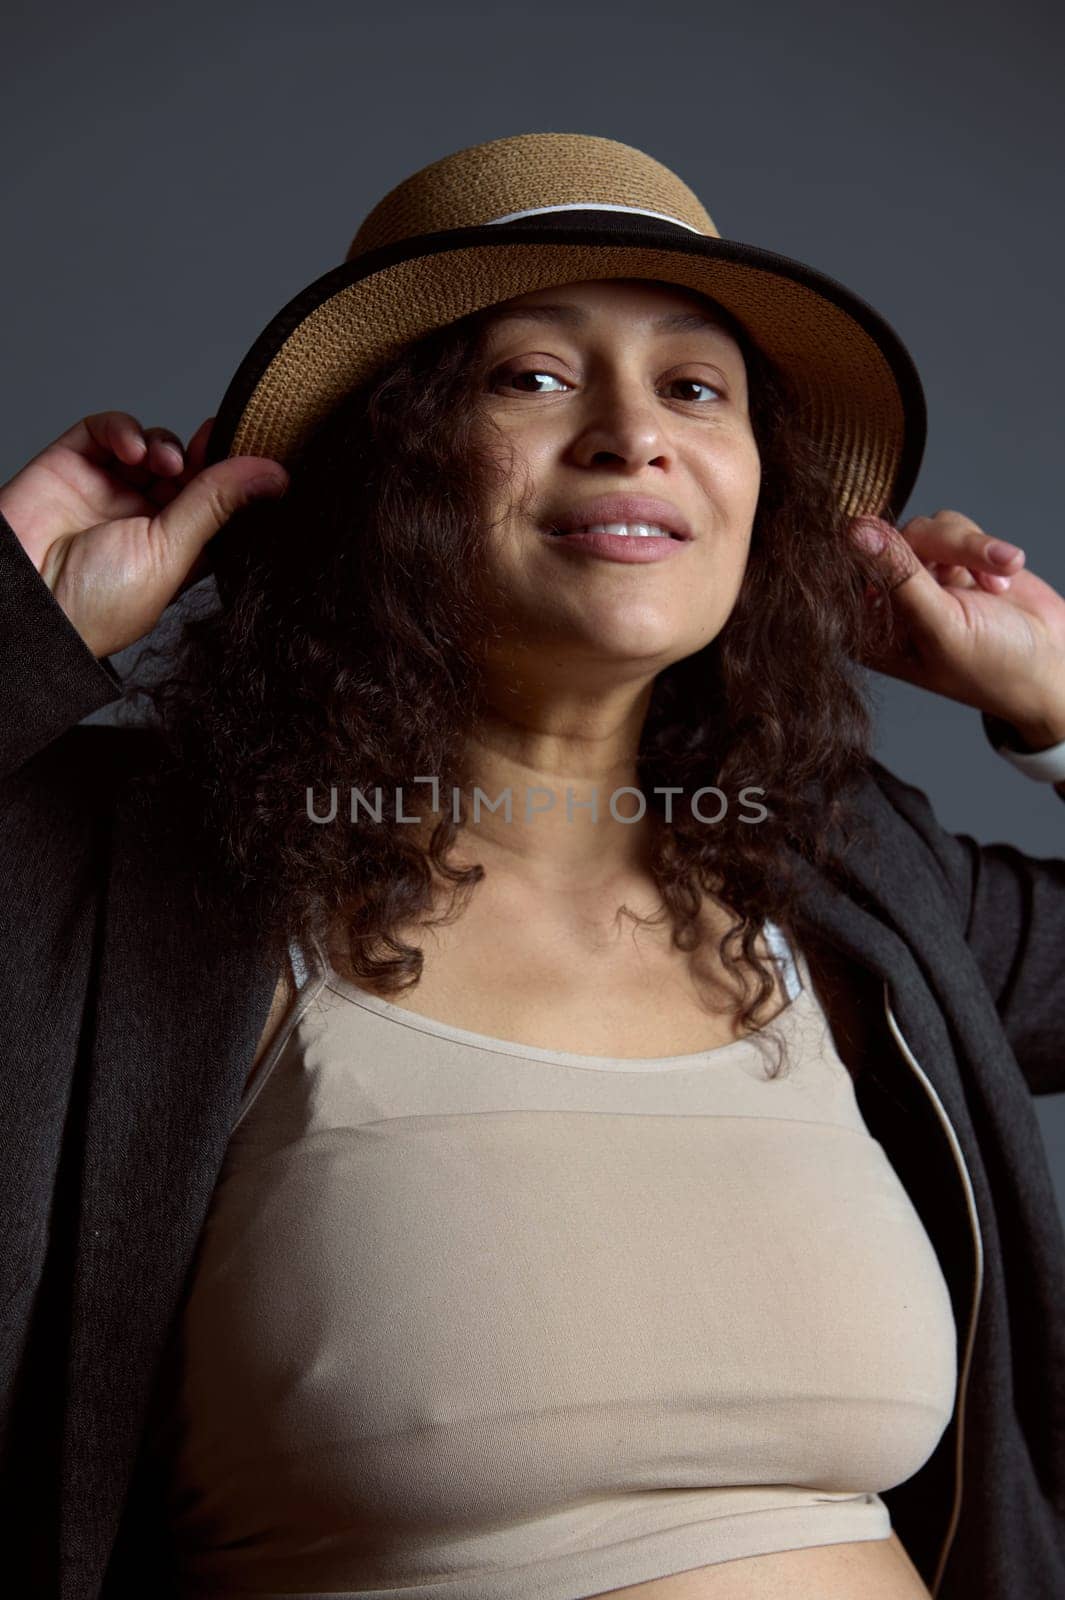 Authentic studio portrait of a multi ethnic beautiful pregnant woman in beige top, gray blazer and a straw hat, smiling looking at the camera, isolated over fashion gray studio background